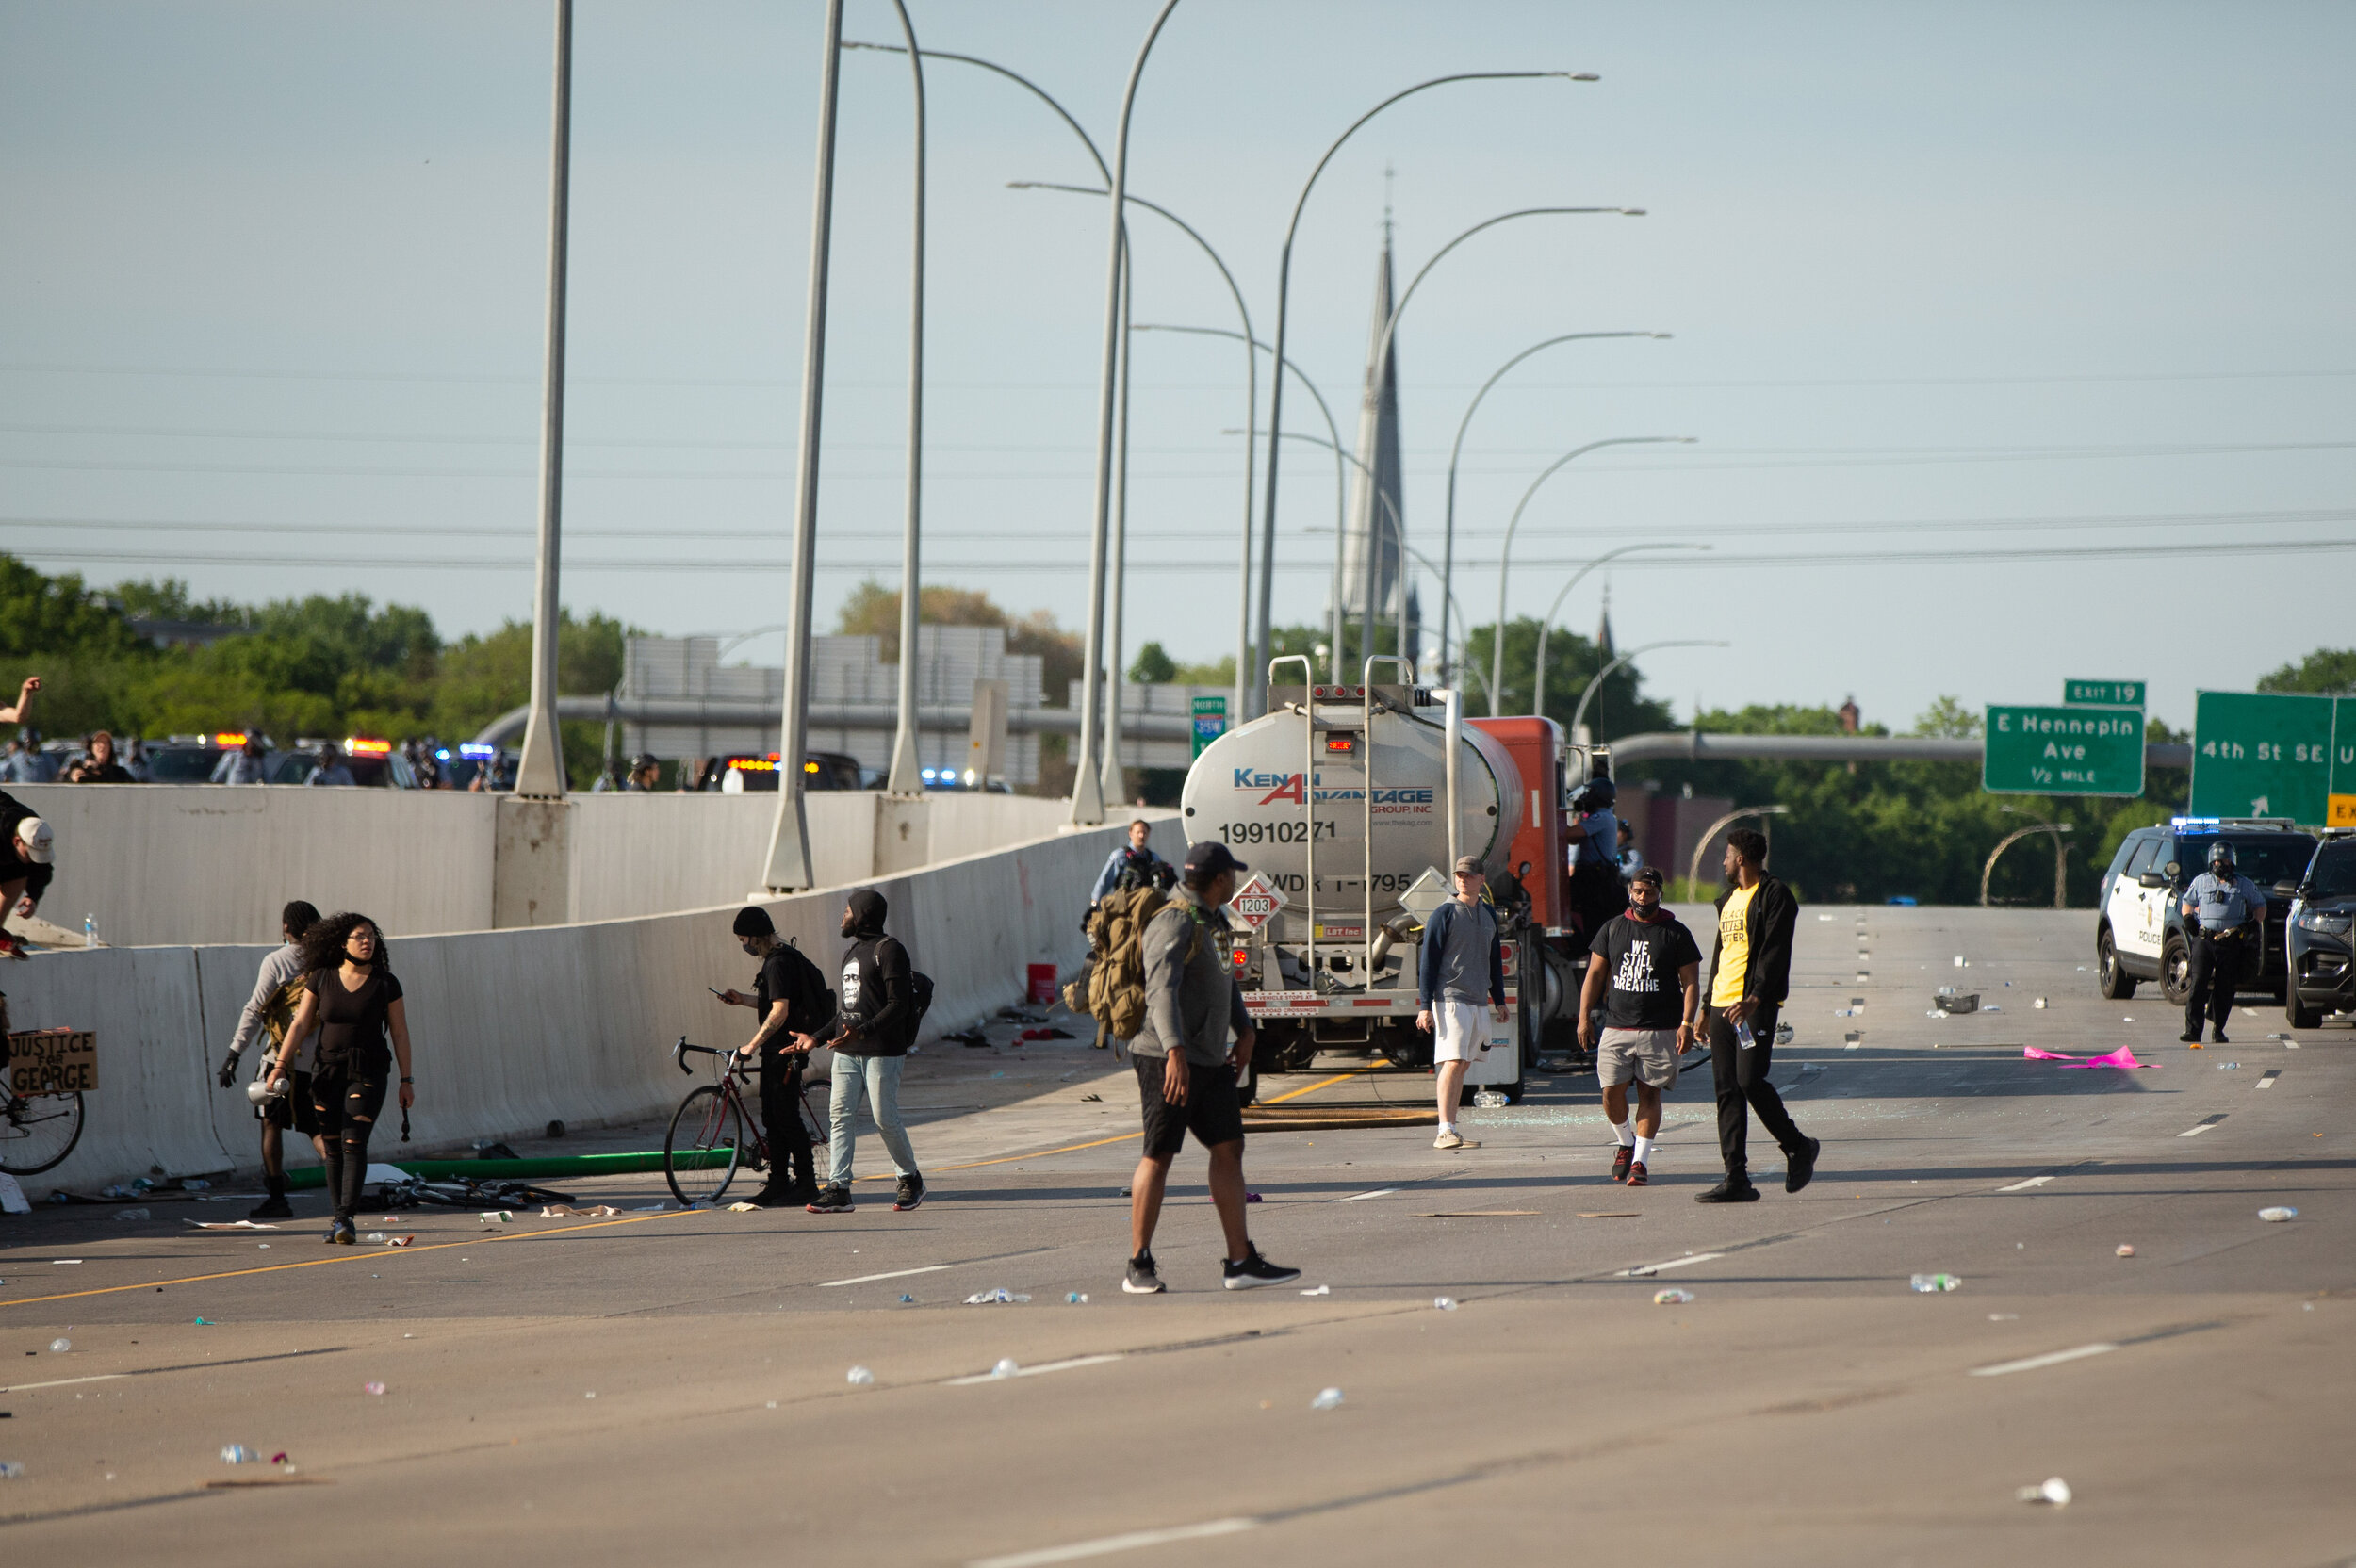  A semi-haulng fuel sits without a driver after its driver Bogdan Vechirko drove through a crowd of protesers on interstate 35W in Minneapolis, Minnesota on May 31, 2020. Chris Juhn/Zenger. 